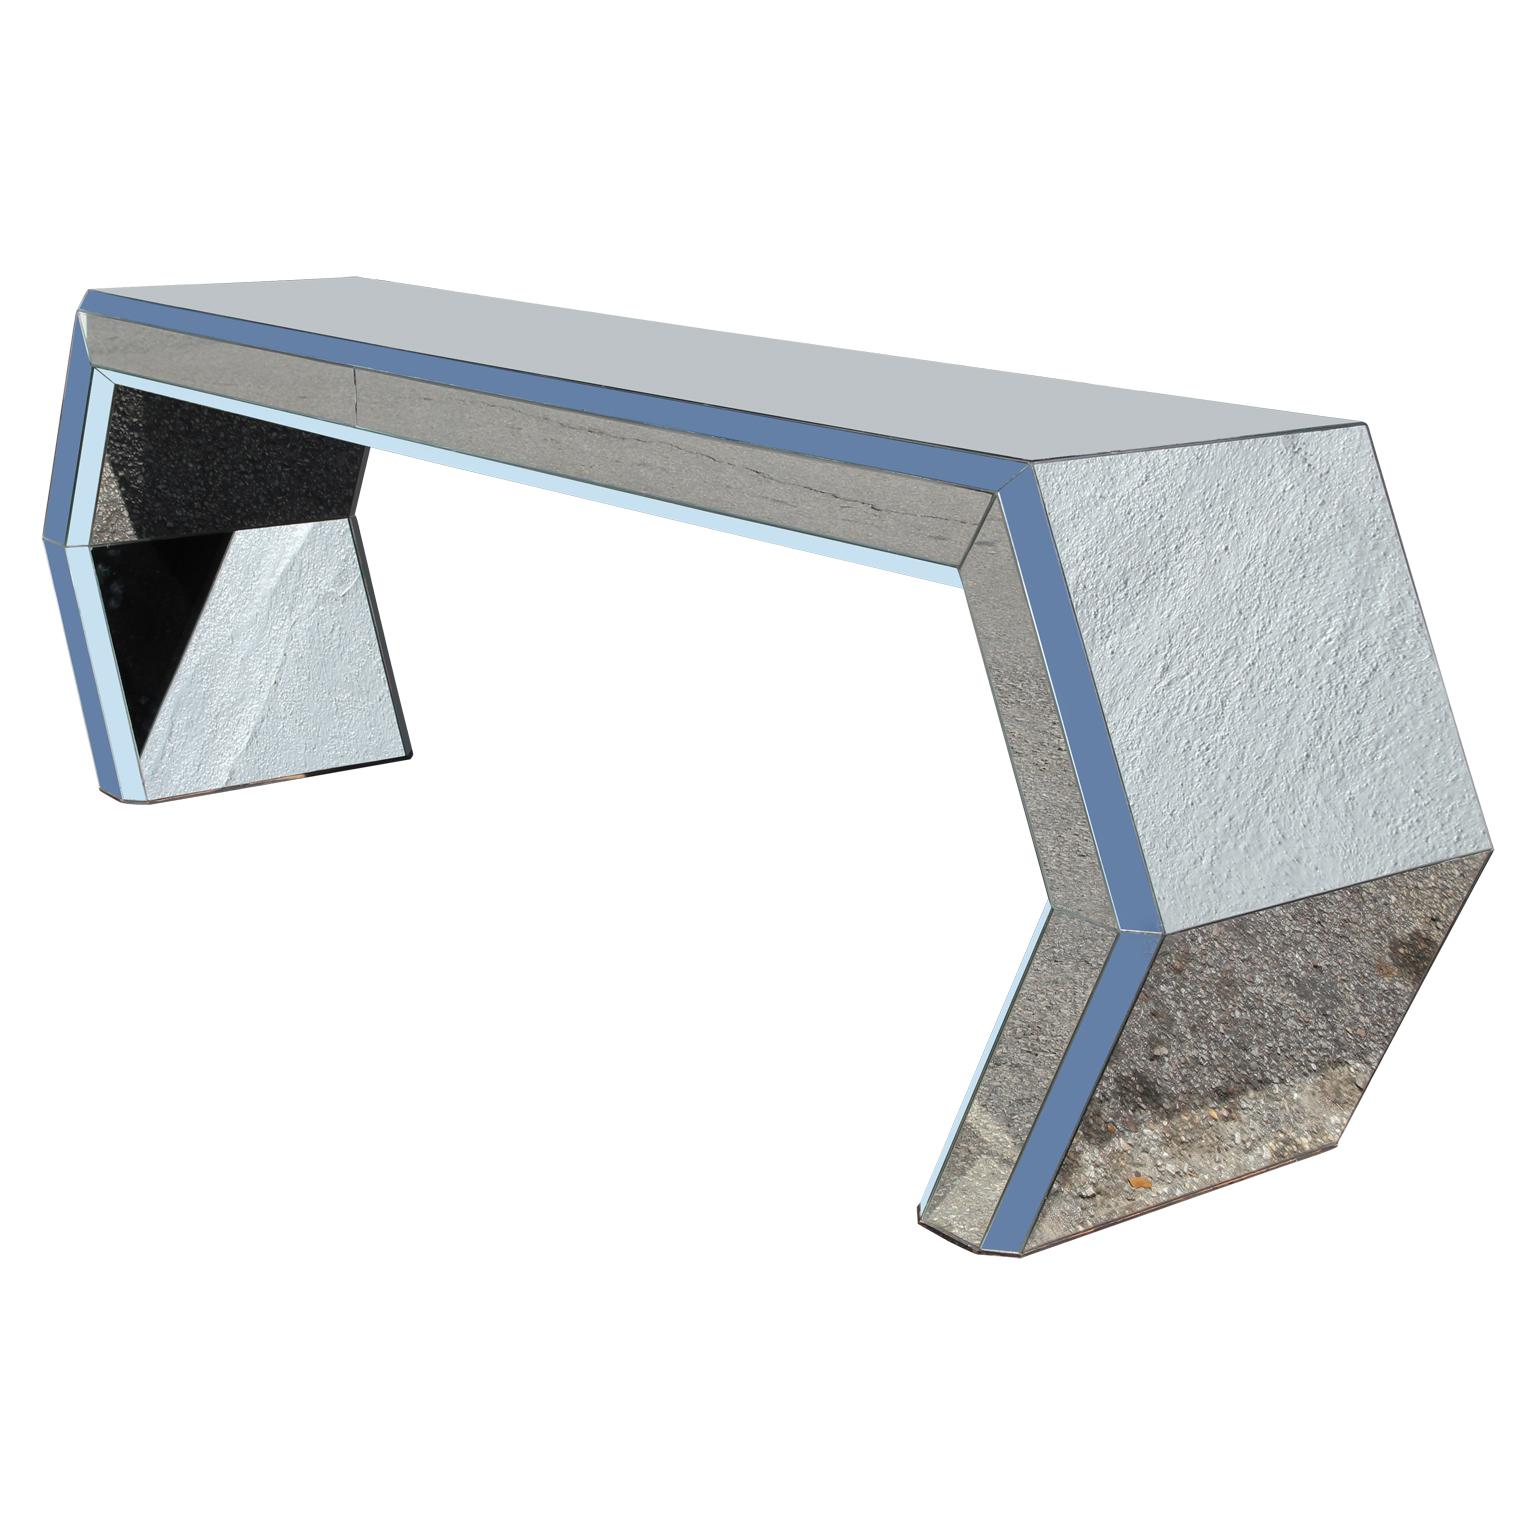 Stunning modern angular geometric mirror entry console table. Photos have been edited to remove glare. The mirror color is silver. There is one small flaw on inside of one leg- no noticeable. Normal wear on the surface with light wear overall in